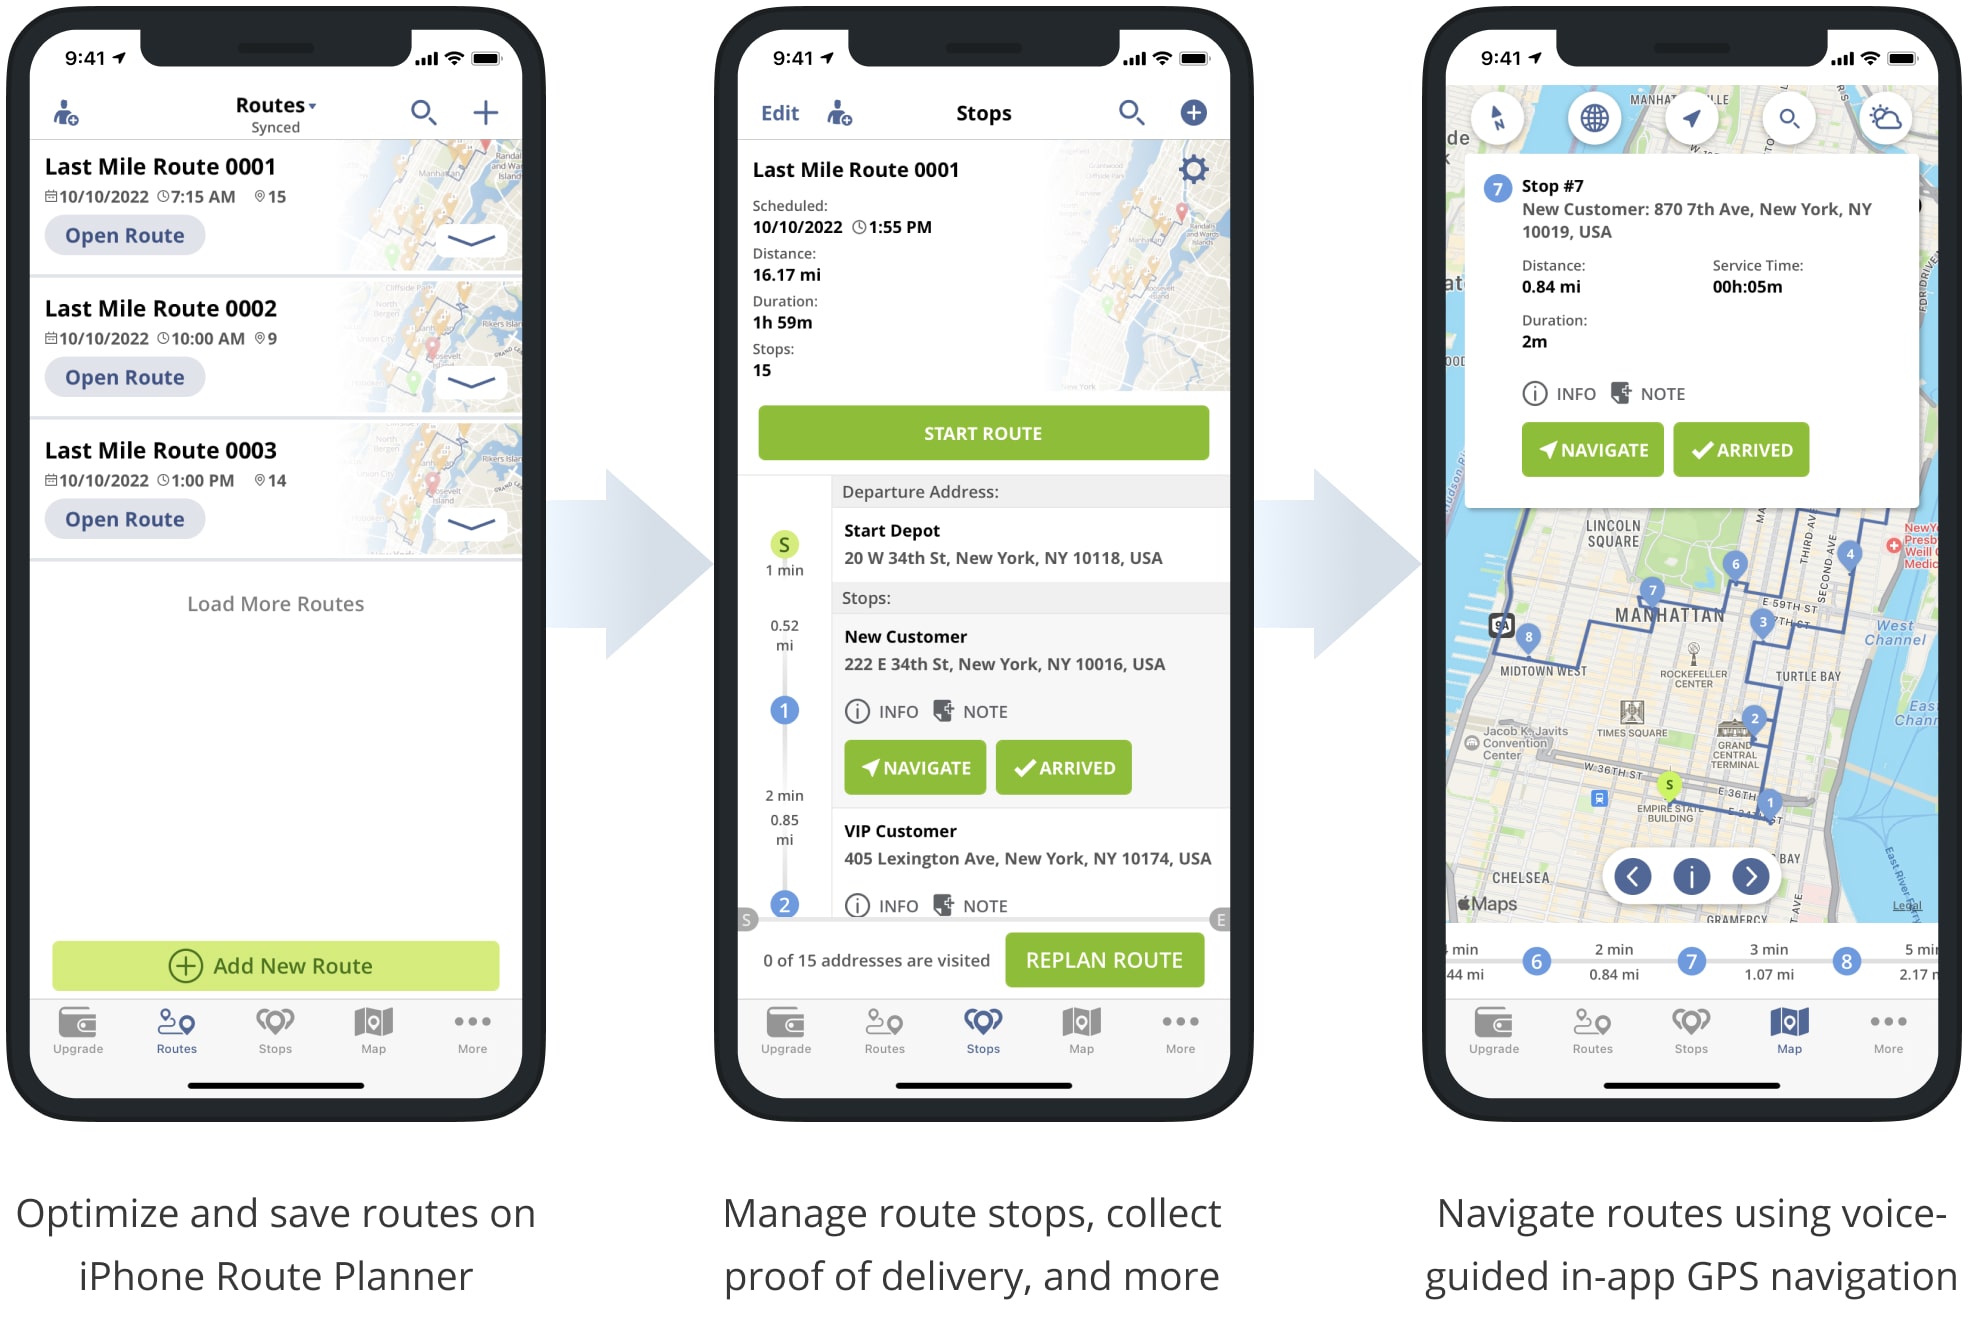 Use Route4Me's iPad and iPhone Route Planner app to map multiple addresses, sequence multi-stop routes, navigate routes, and more. 